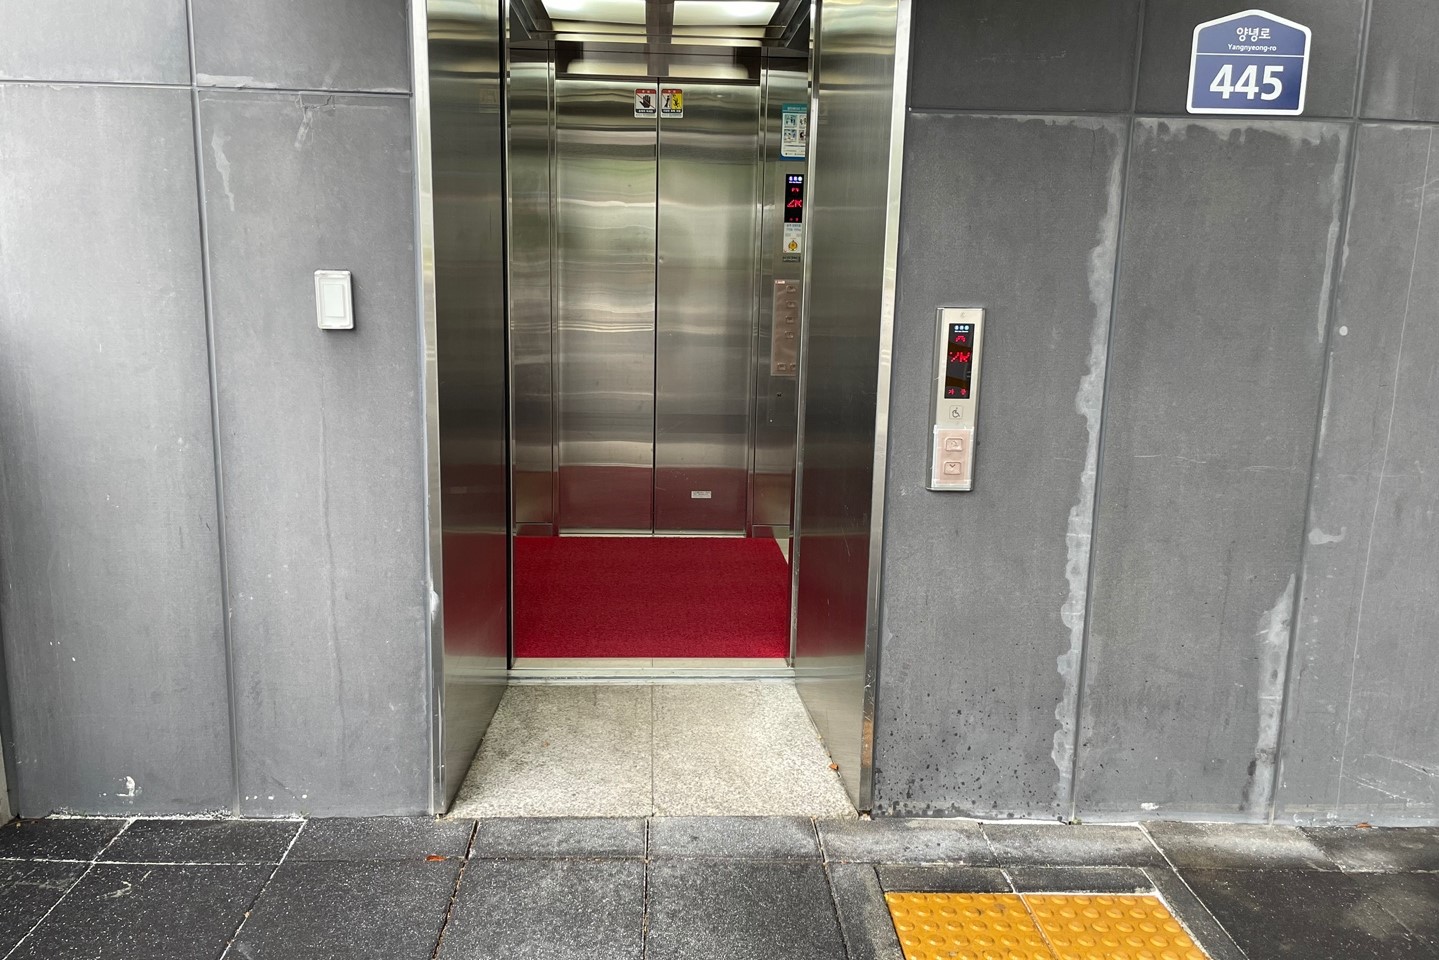 Elevator0 : Exterior view of the elevator which wheelchair users can use conveniently 